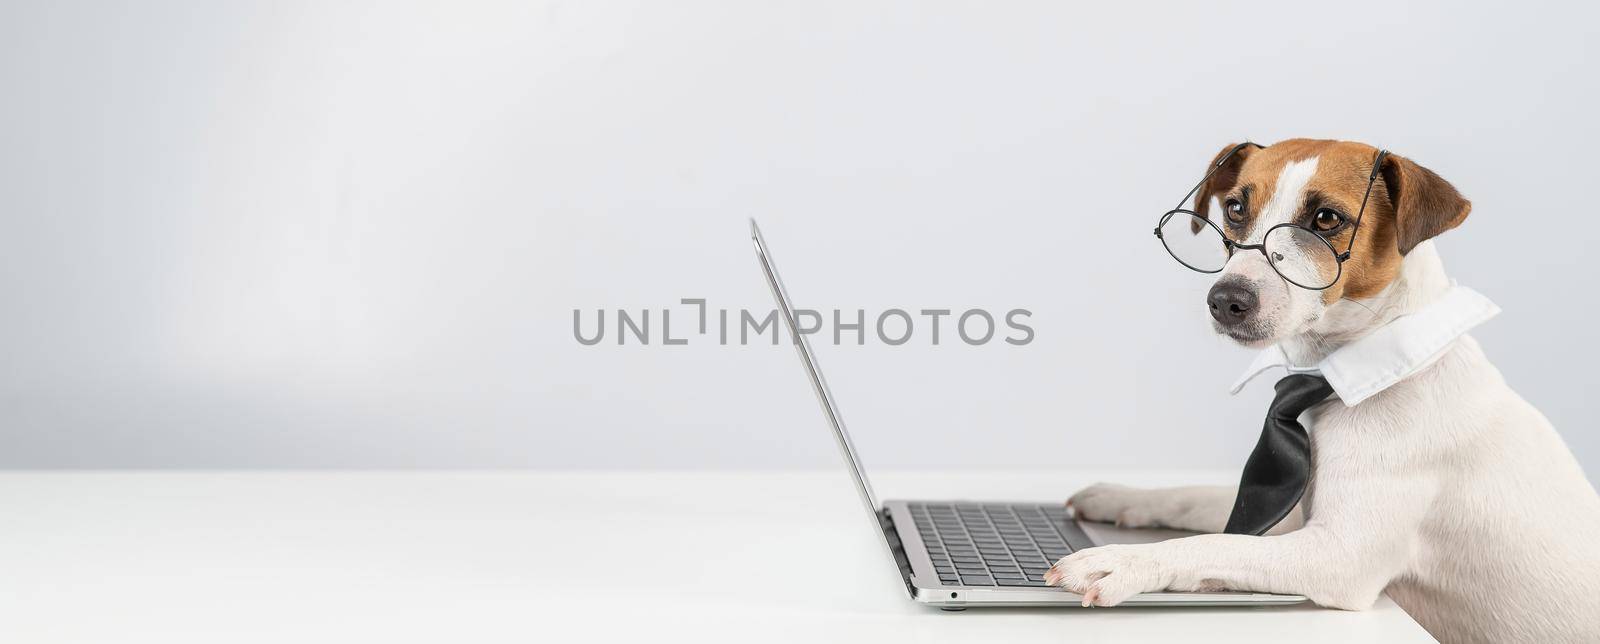 Jack russell terrier dog in glasses and tie works on laptop on white background